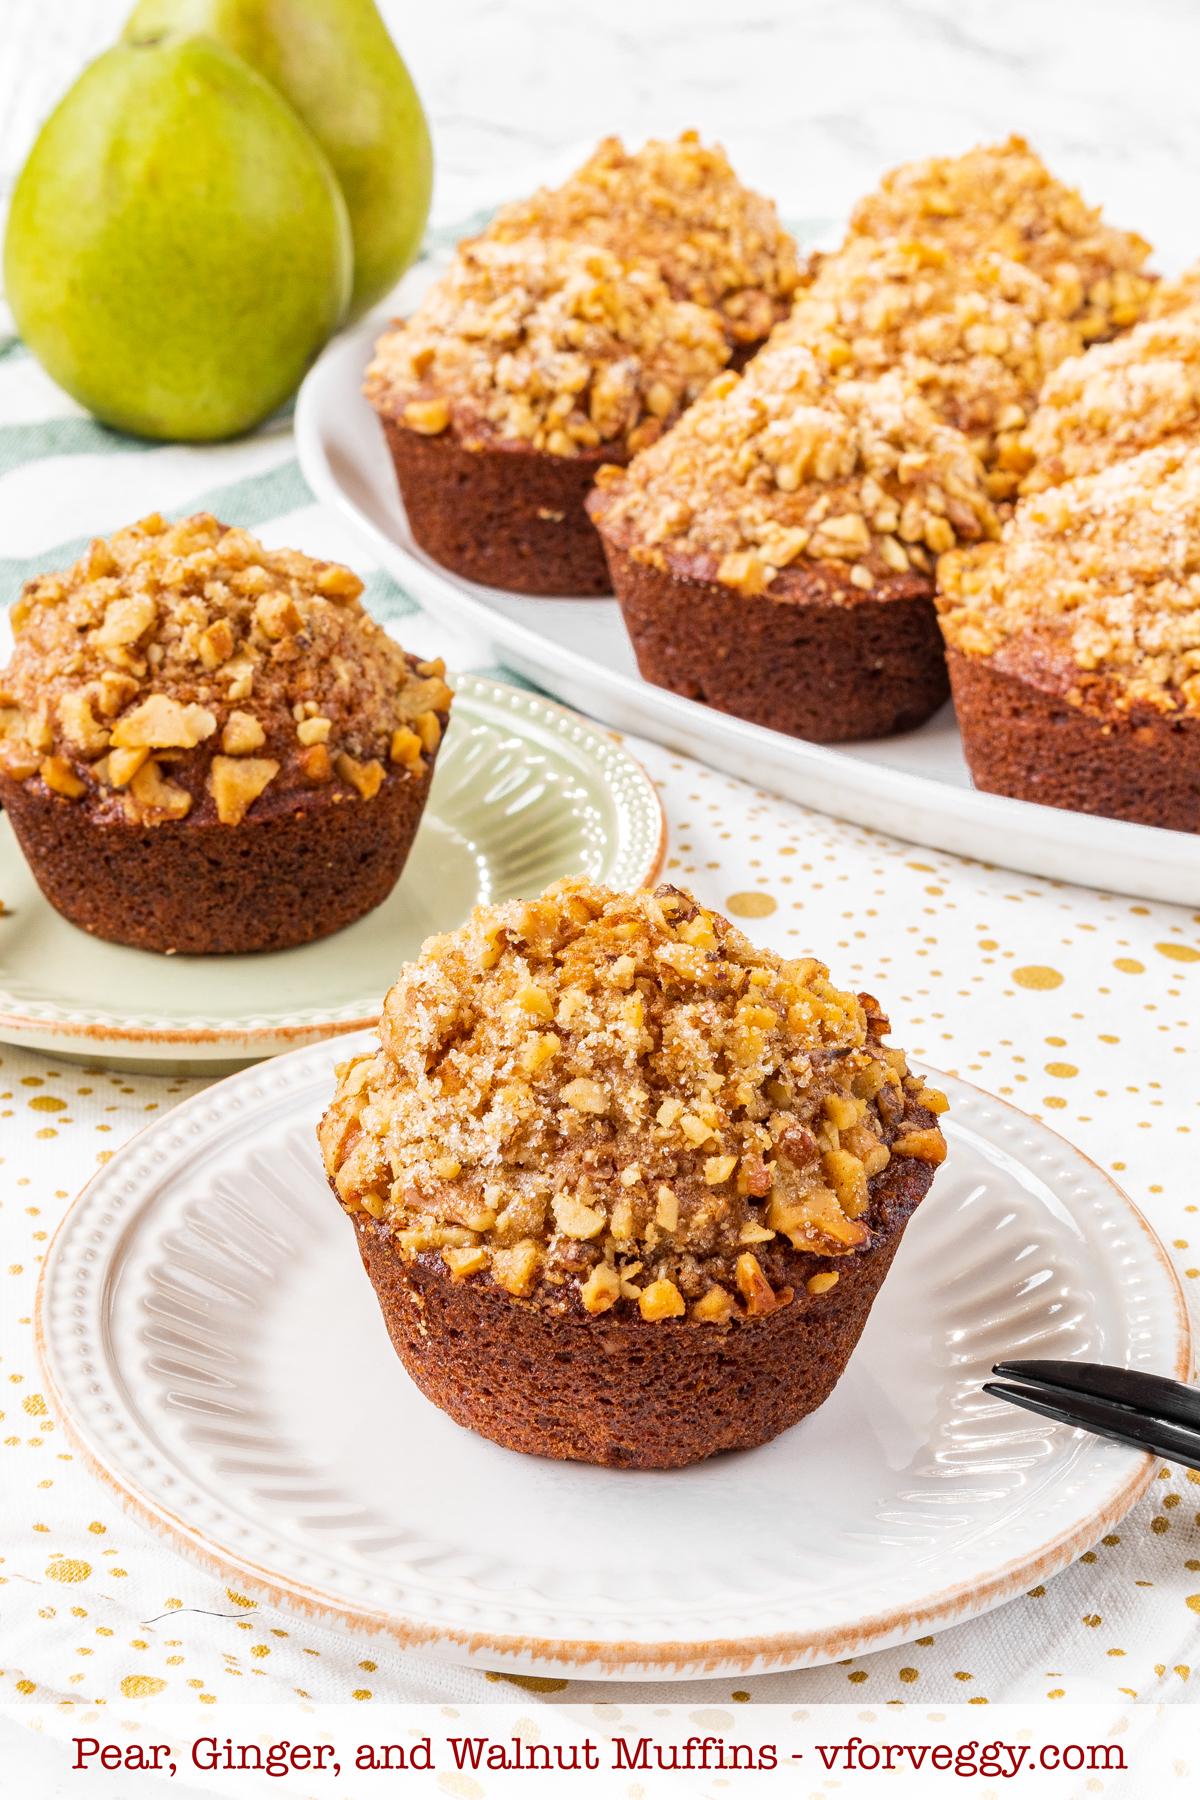 Pear, ginger, and walnut muffins.